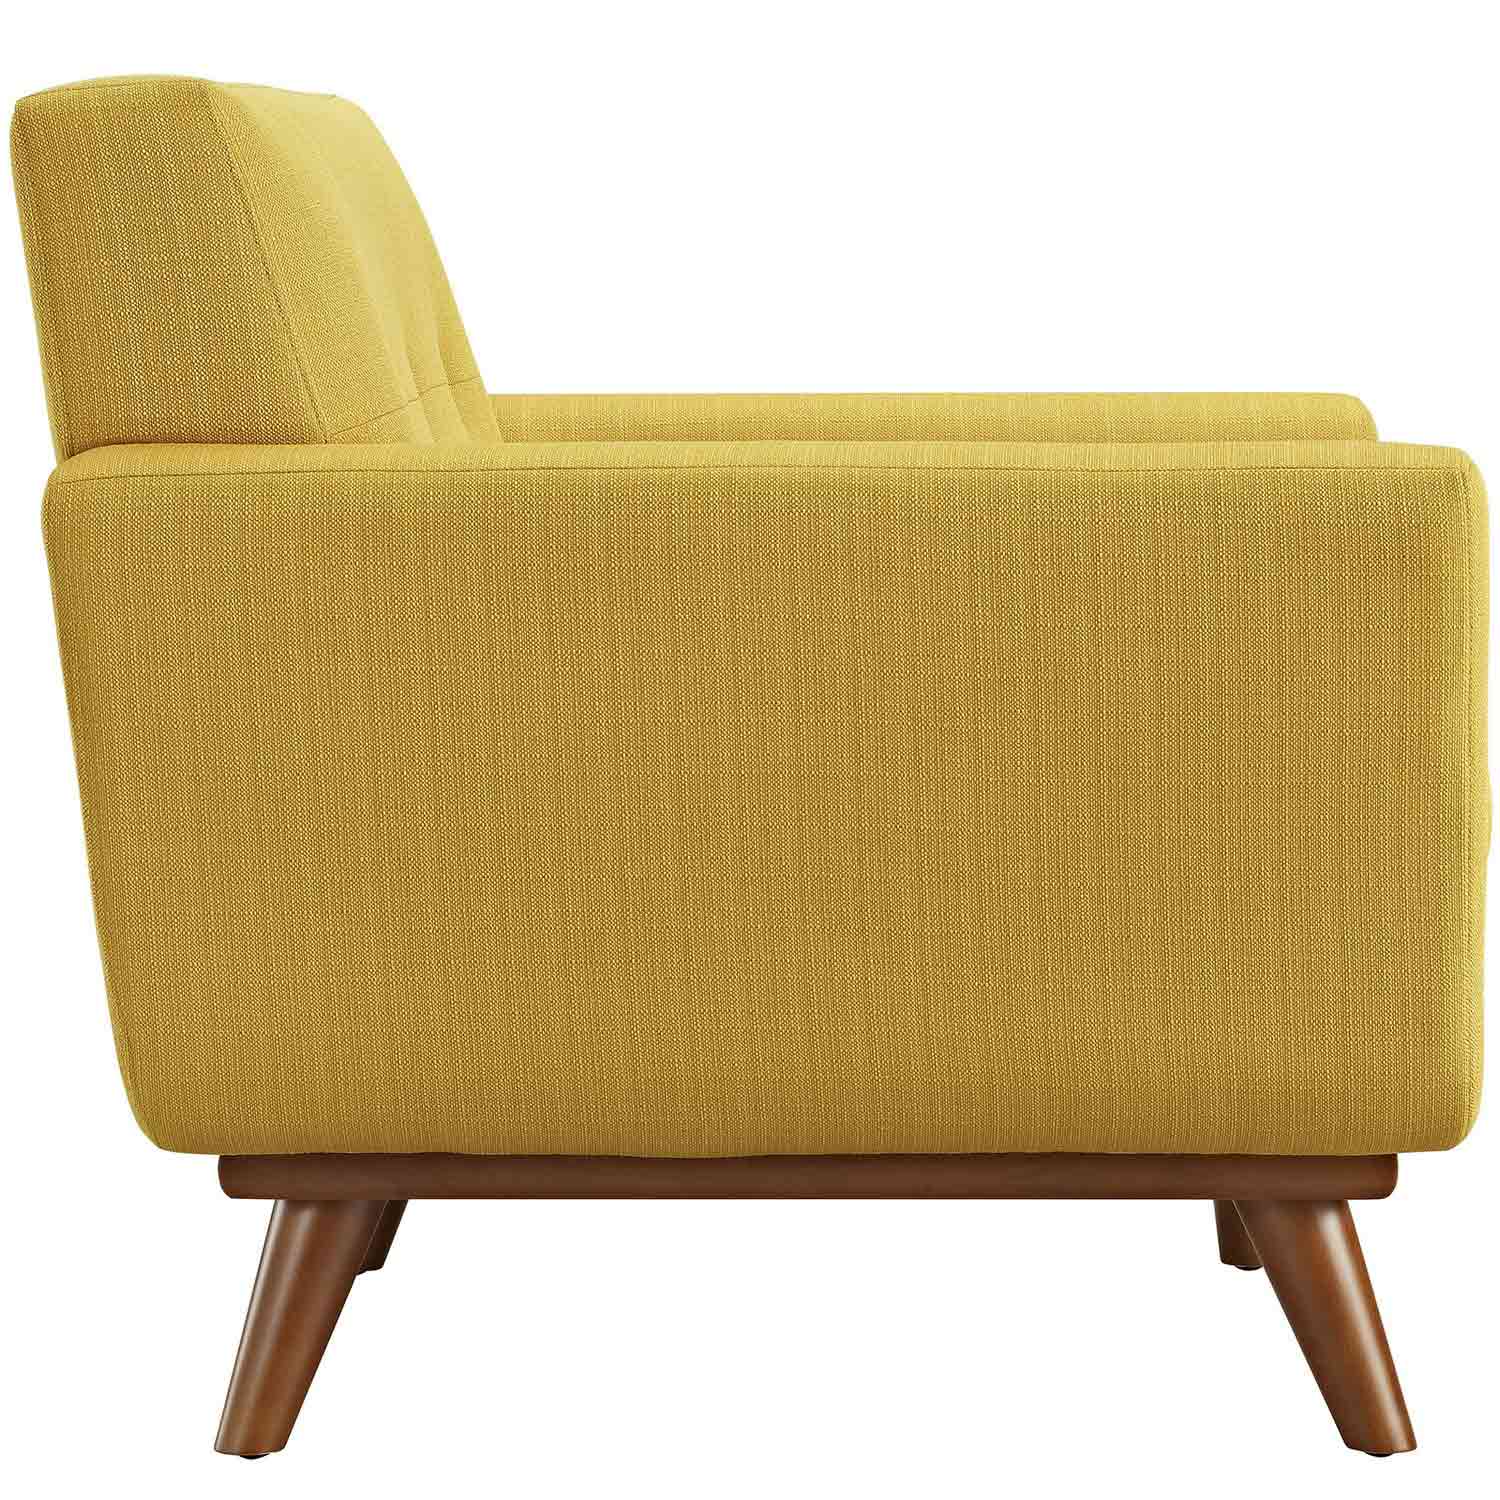 Modway Engage Upholstered Armchair - Citrus